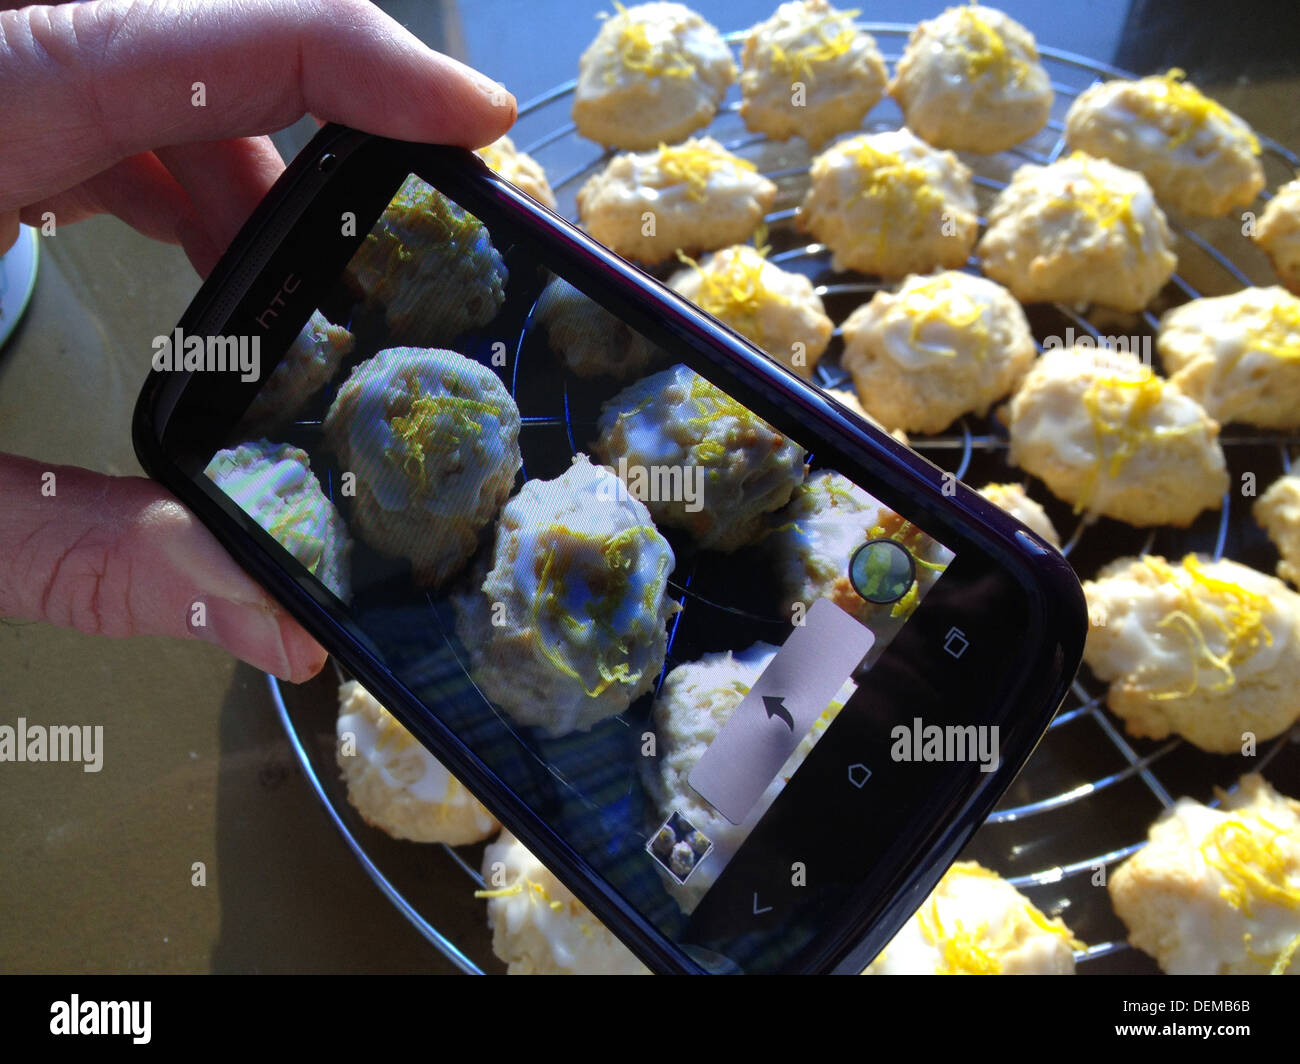 Person taking pictures of Cookies with digital mobile & camera Stock Photo